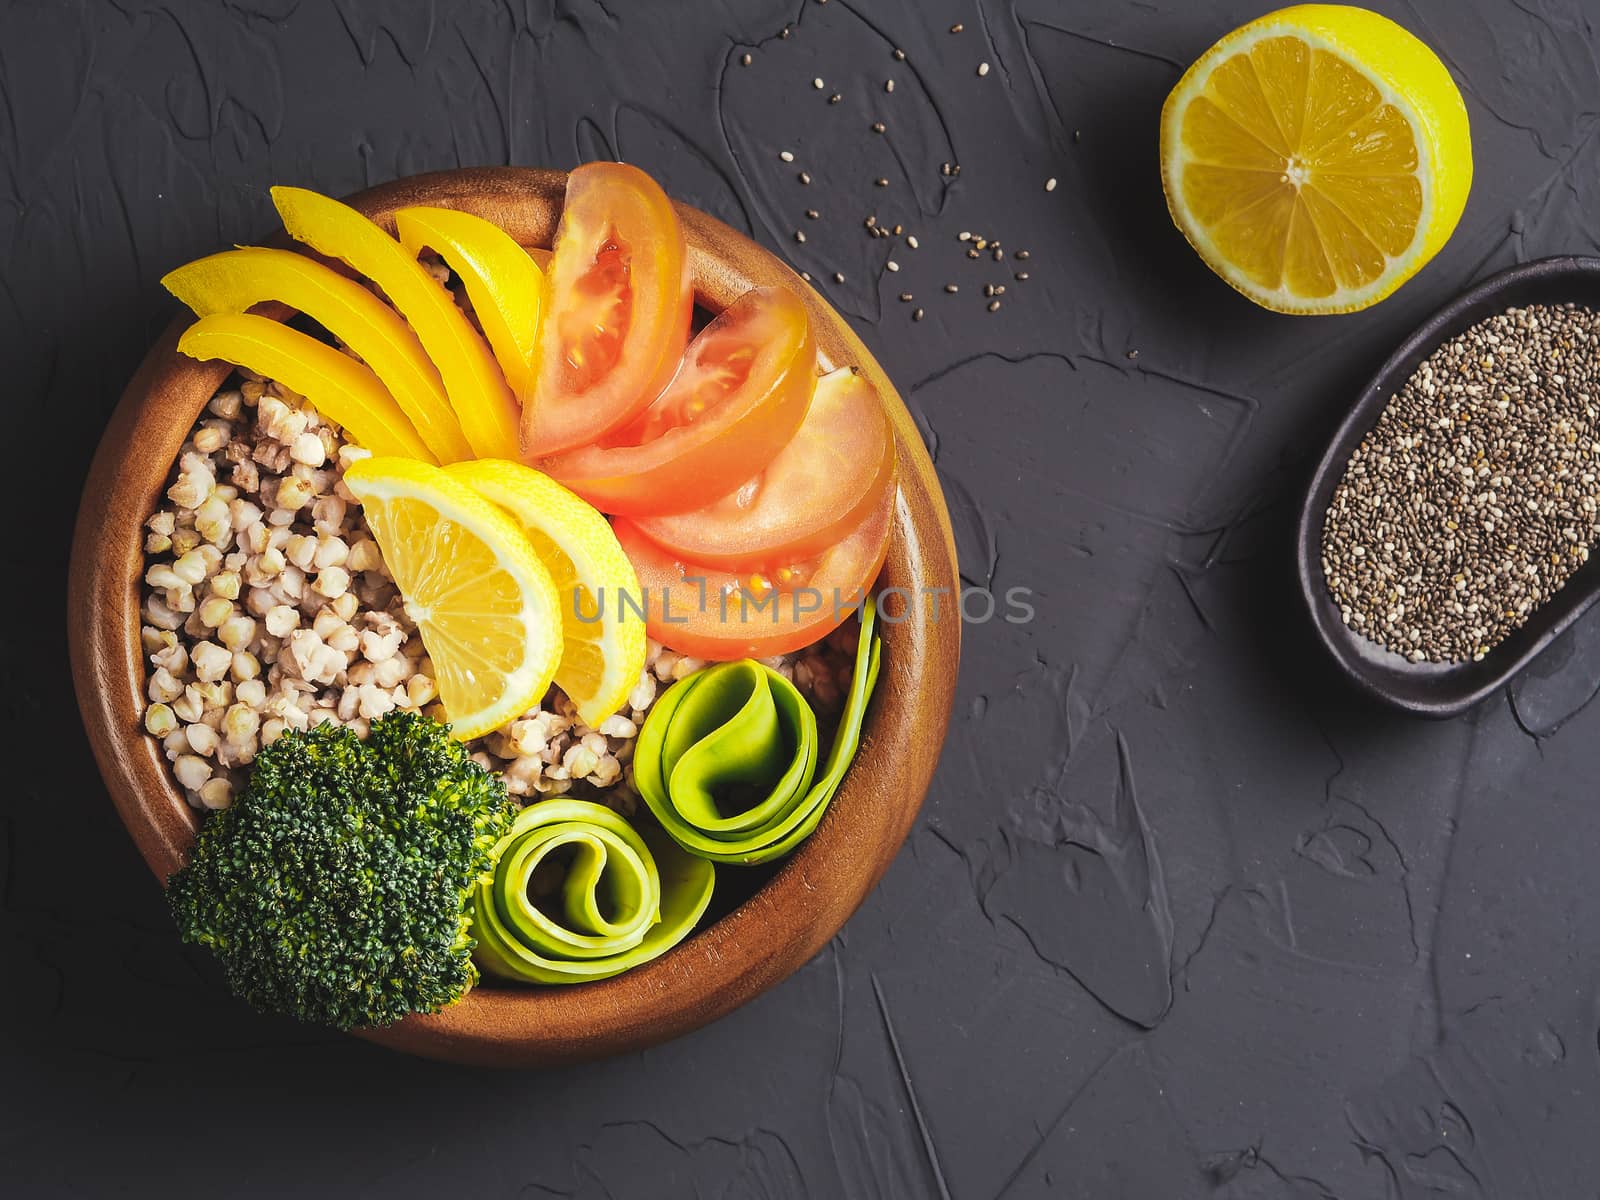 Top view of vegetarian buddha bowl with green buckwheat, broccoli, avocado, tomatoes and yellow sweet pepper paprika on dark concrete background with copy space